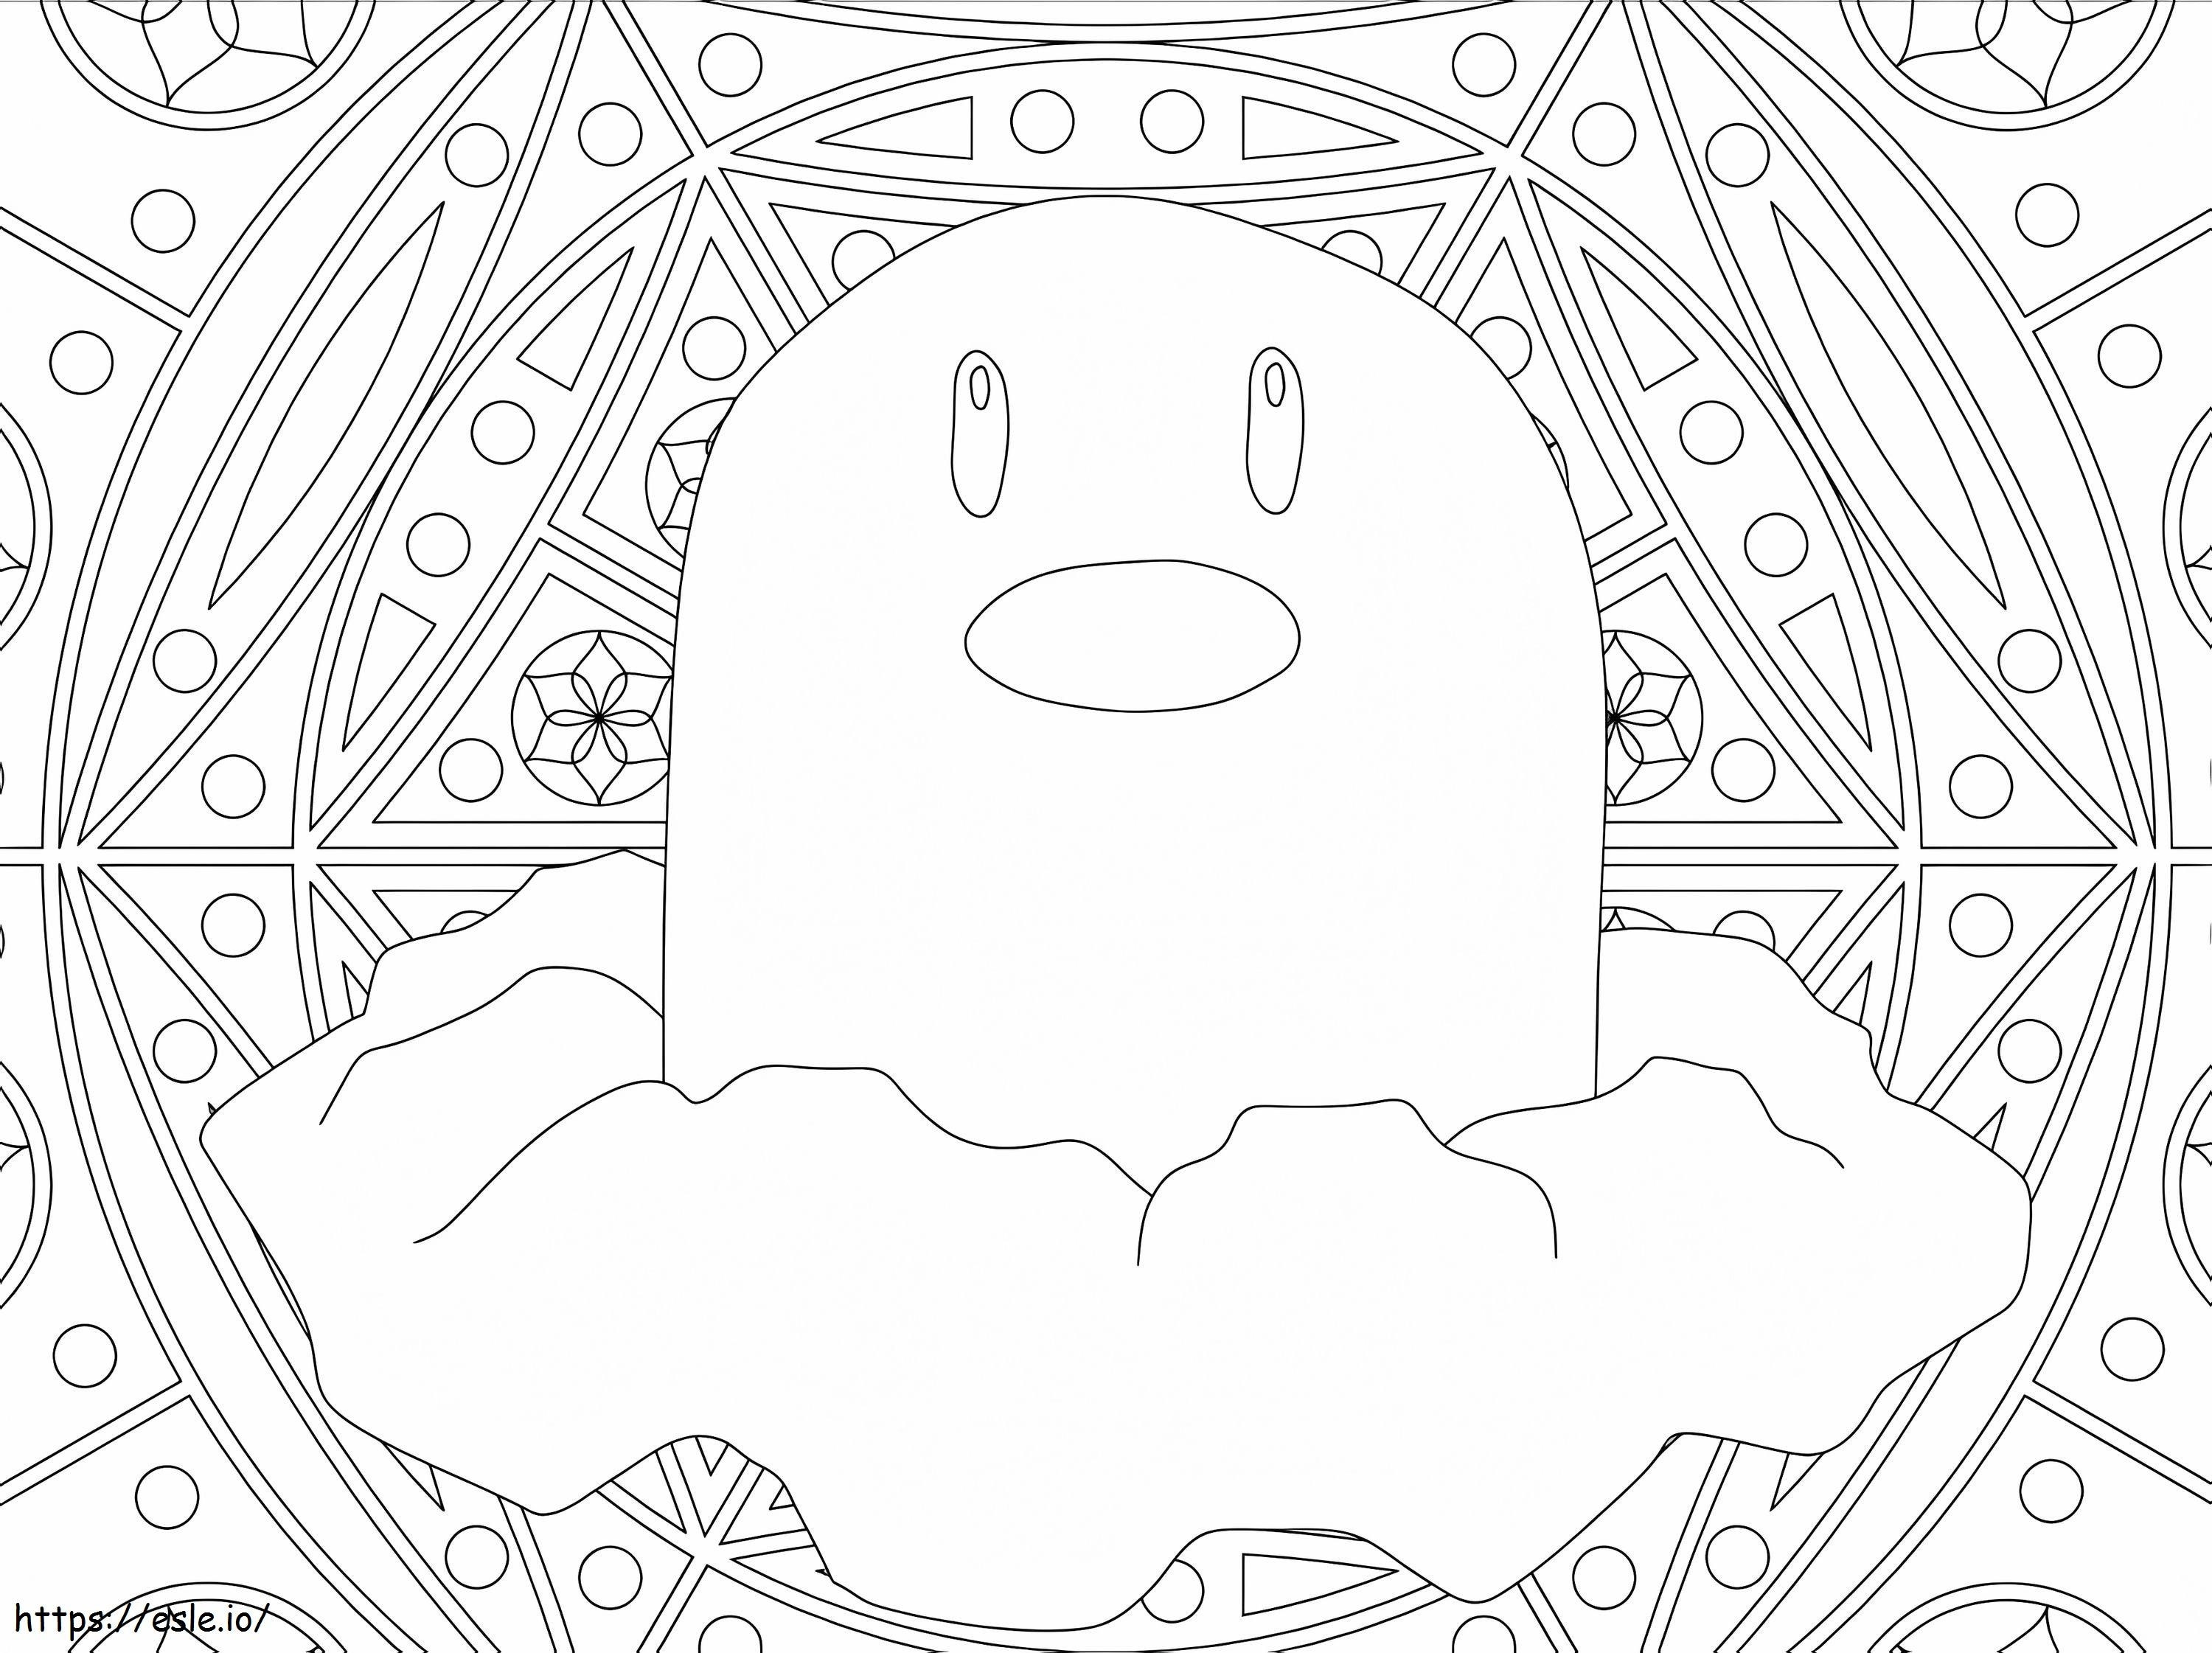 Diglett 4 coloring page